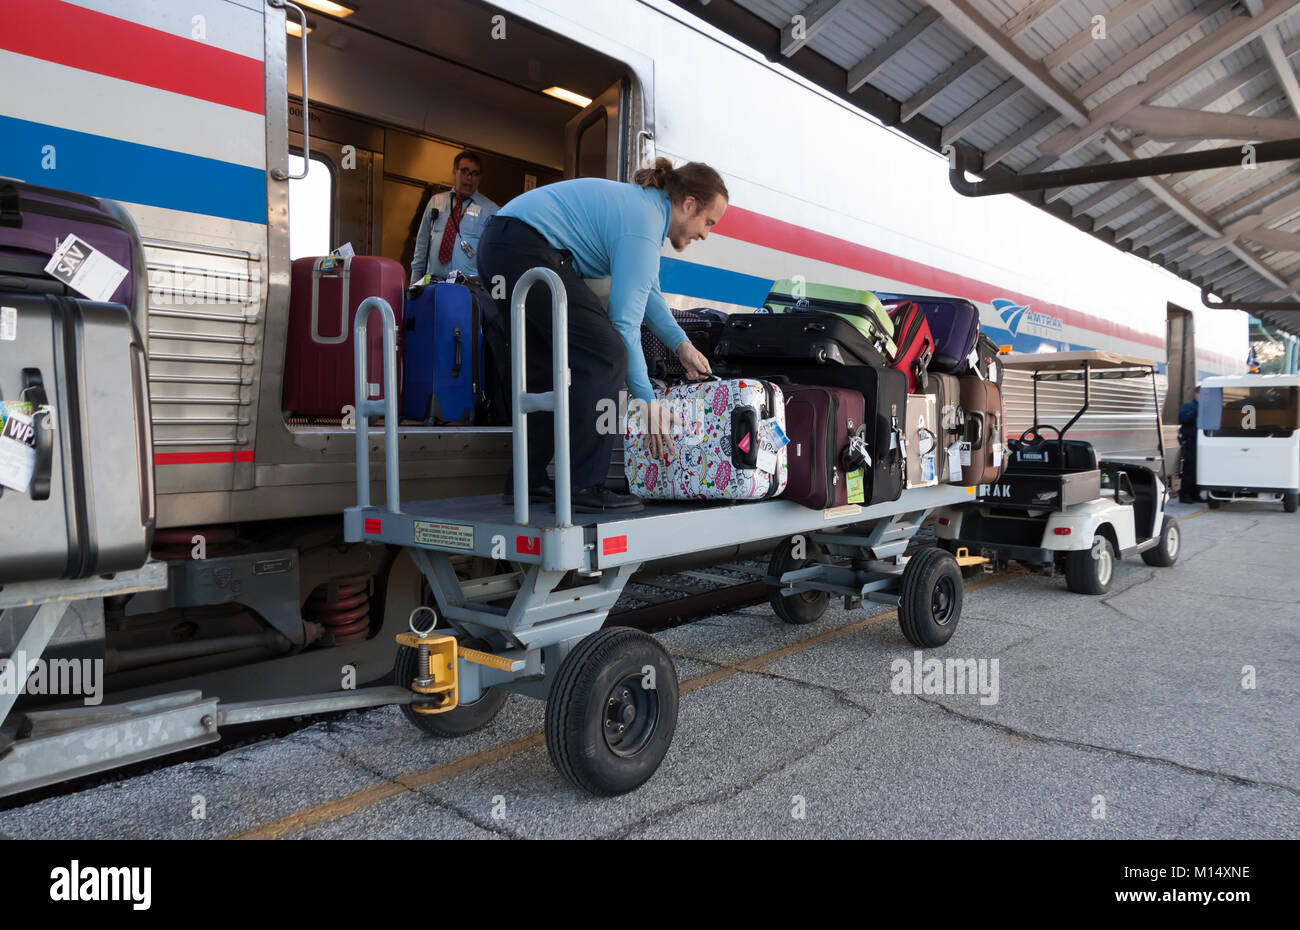 Amtrak porter loading luggage into the baggage car at a station in Tampa, Florida. Stock Photo